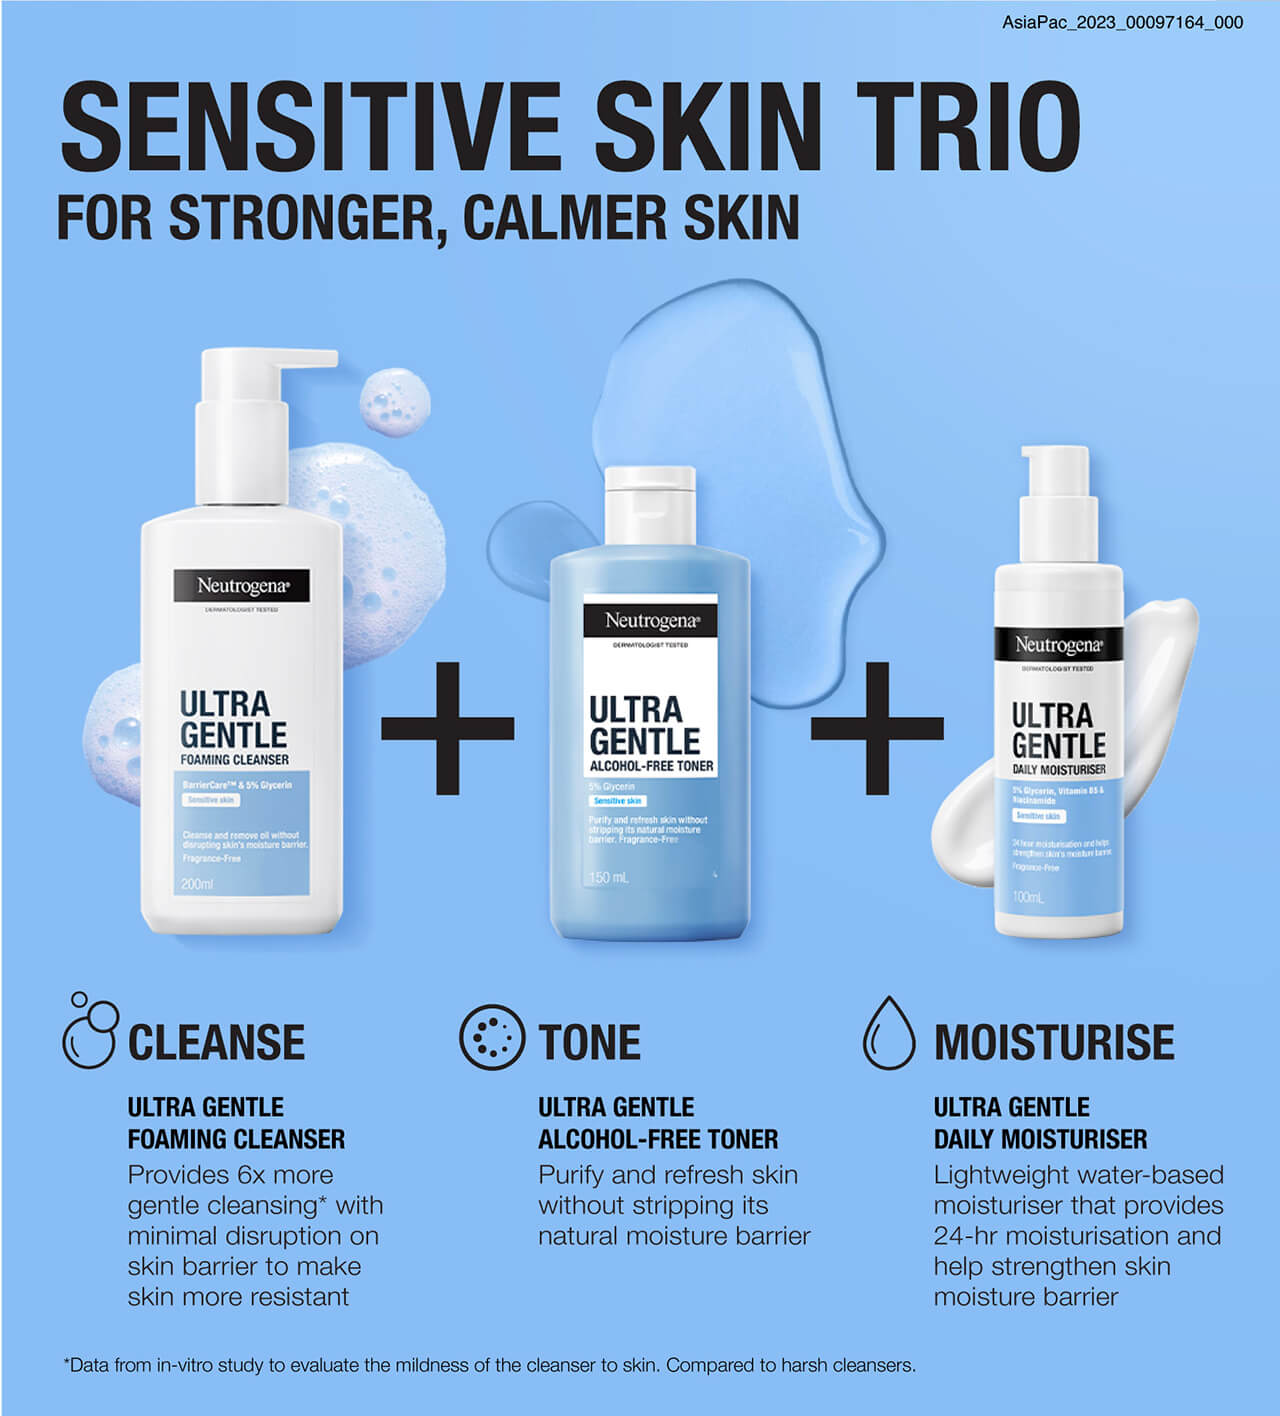 SENSITIVE SKIN TRIO FOR STRONGER, CALMER SKIN  CLEANSE ULTRA GENTLE FOAMING CLEANSER Provides 6x more gentle cleansing* with minimal disruption on skin barrier to make skin more resistant  TONE ULTRA GENTLE ALCOHOL-FREE TONER Purify and refresh skin witho